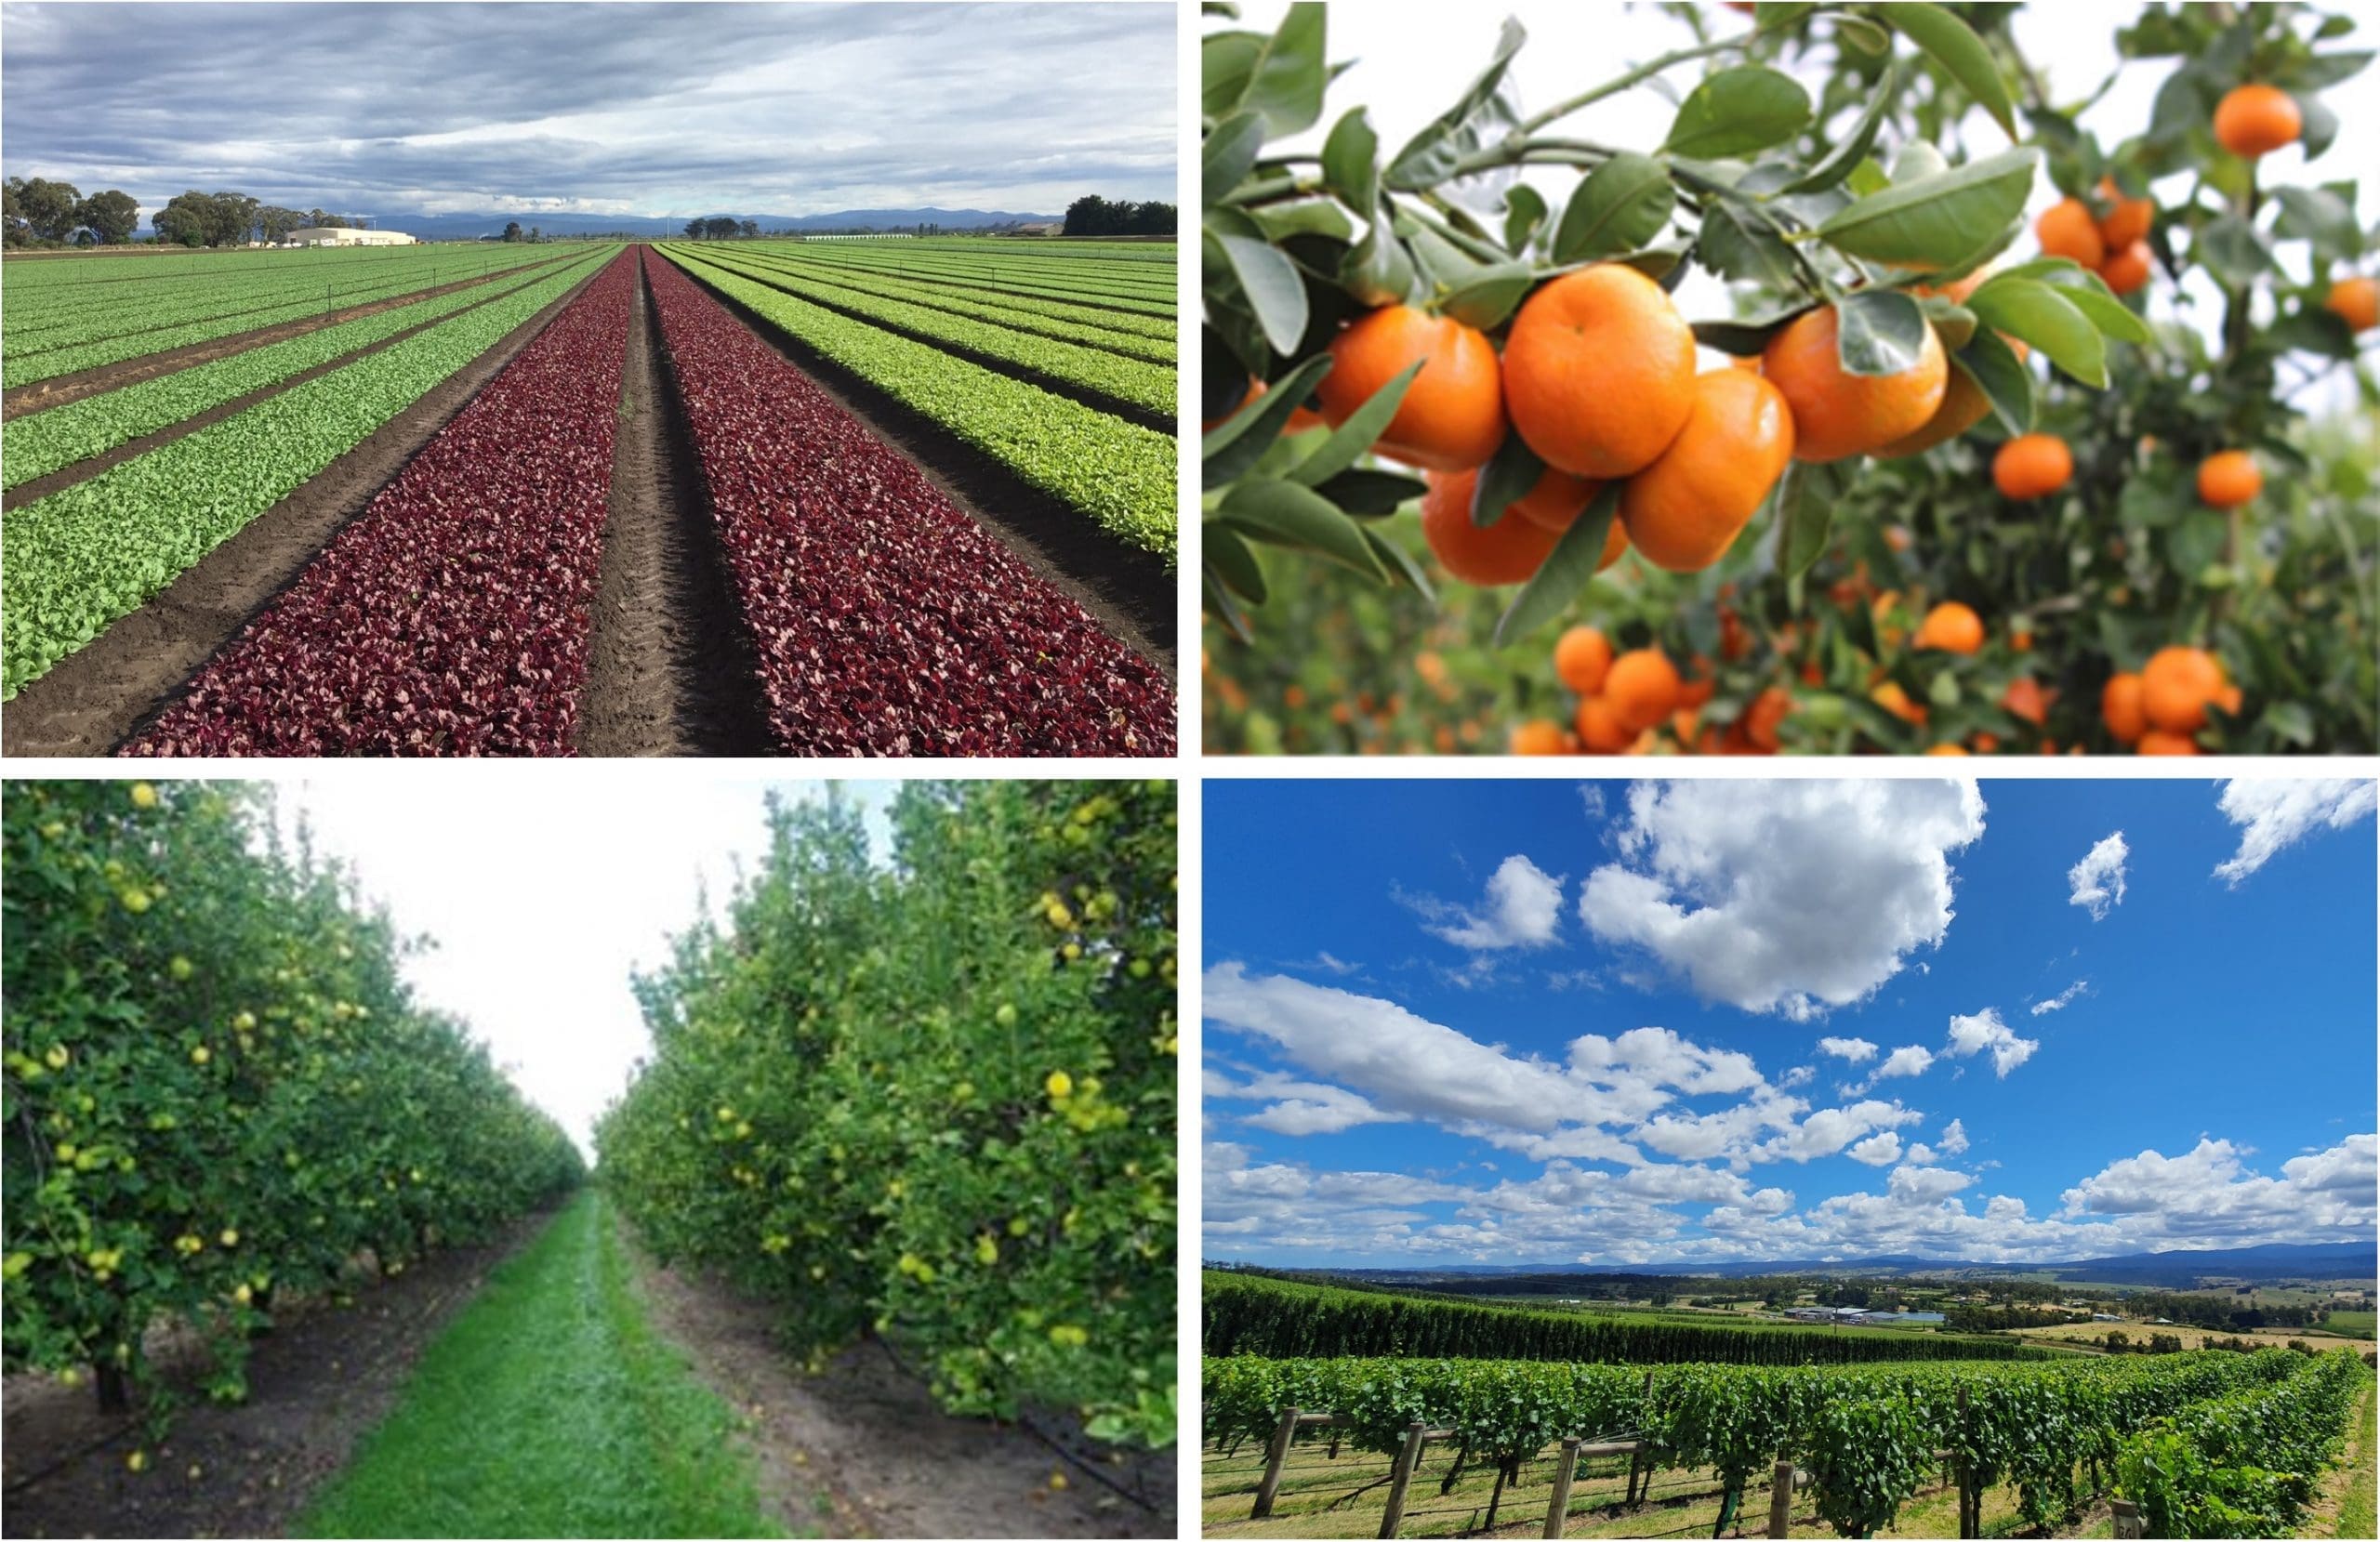 Four images relating to key target assets for the Warakirri Diversified Agriculture Fund